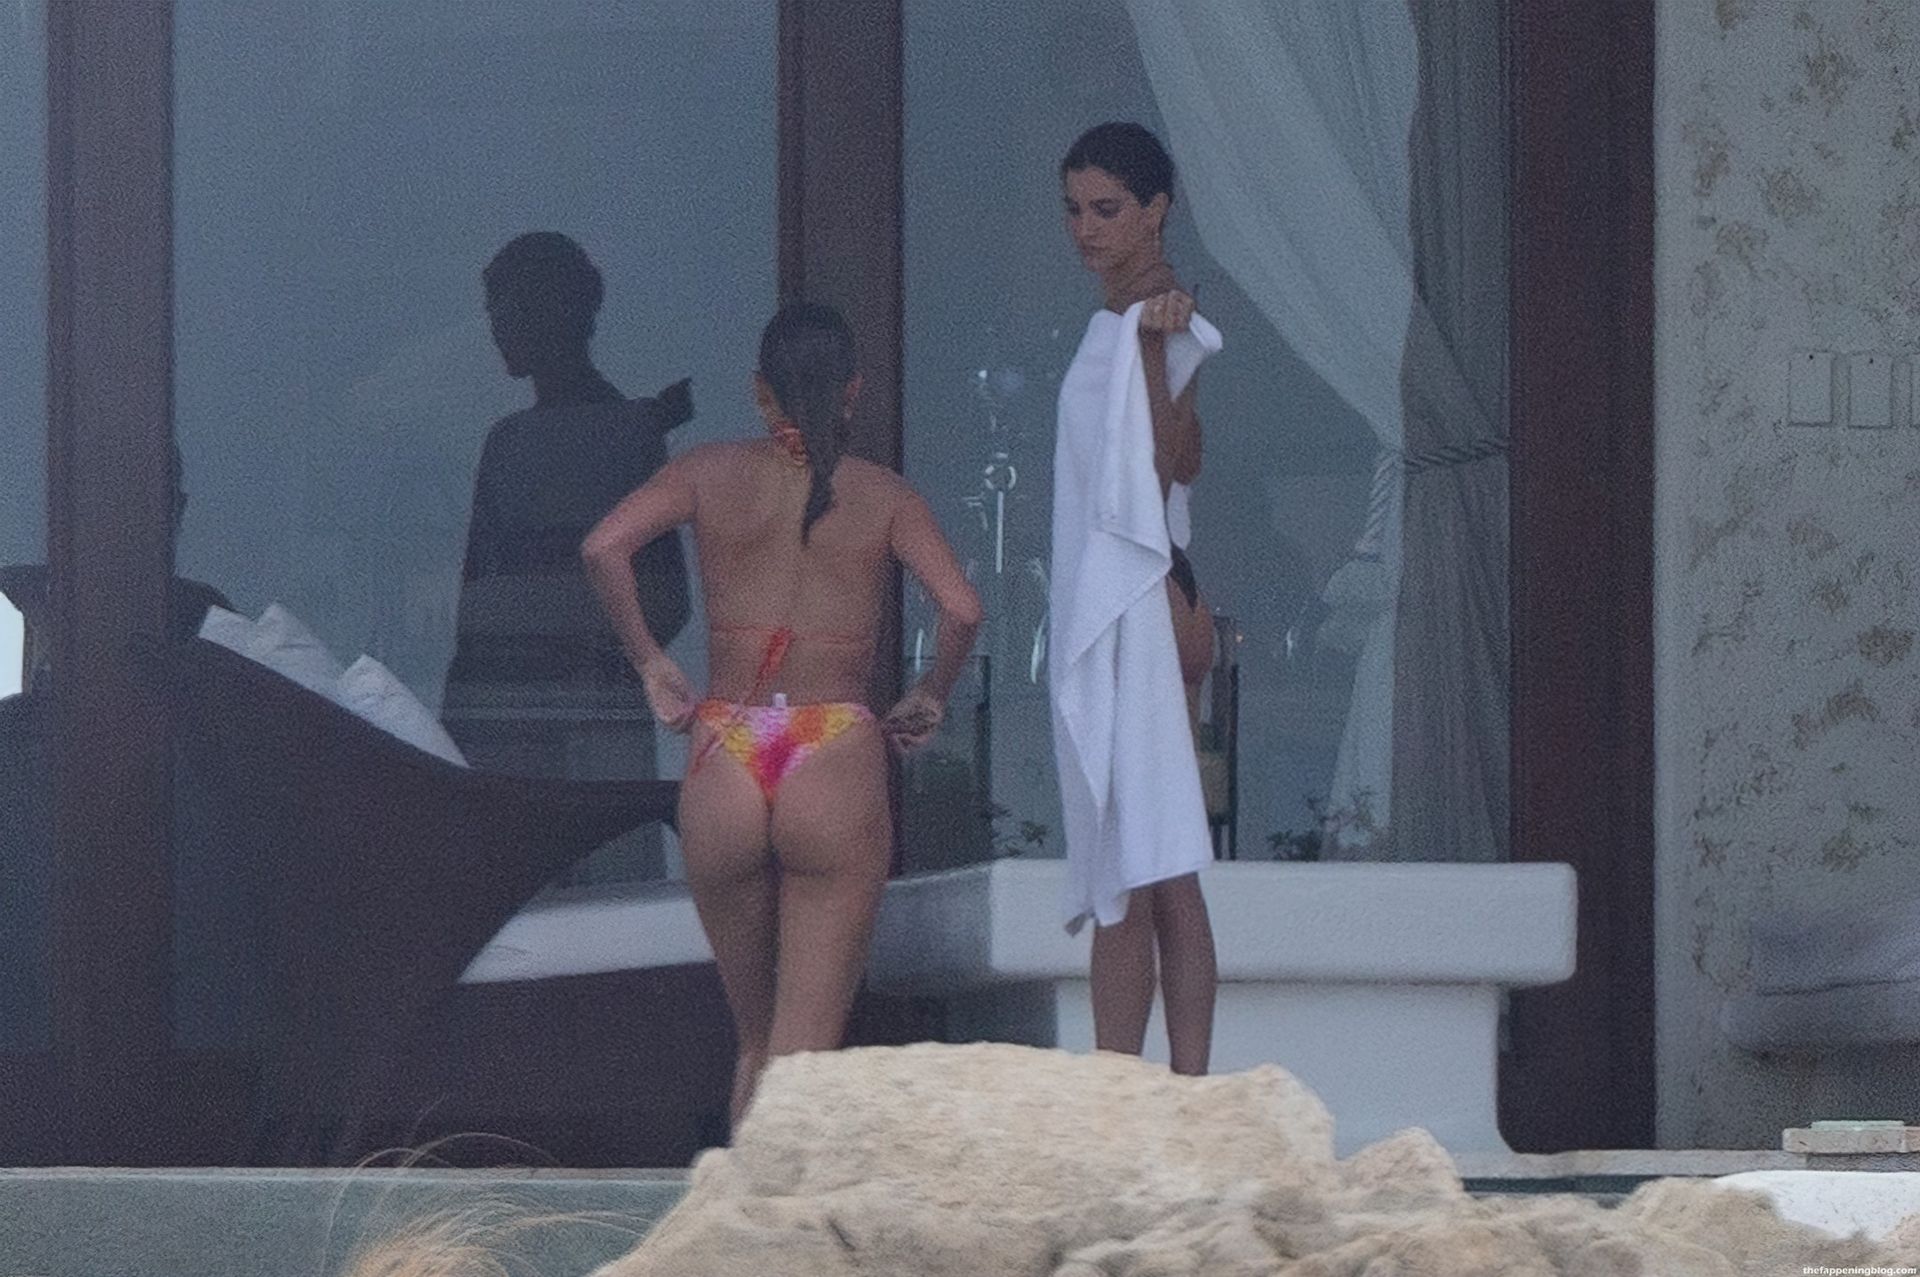 Kendall Jenner & Hailey Bieber Bare Their Sizz
ling Bodies in String Bikinis (58 Photos)